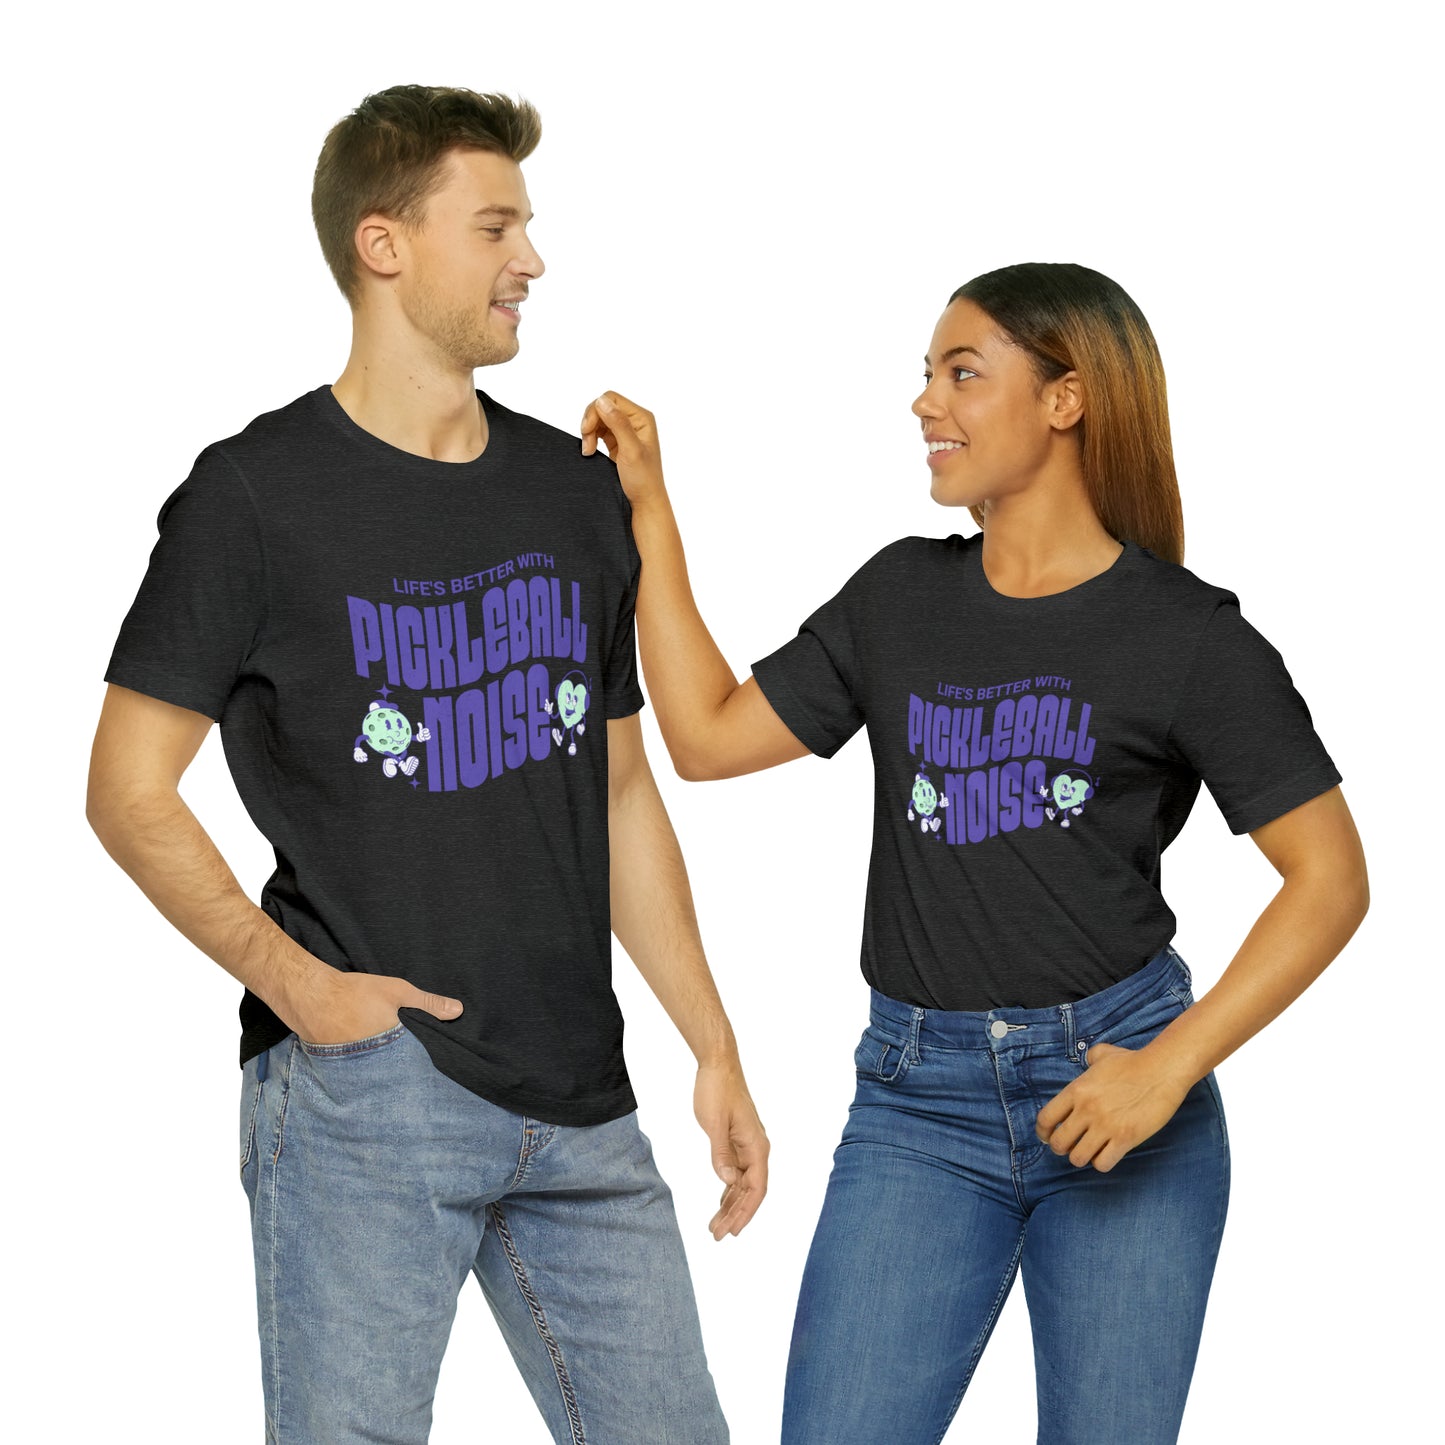 Life's Better With Pickleball Noise T-Shirt